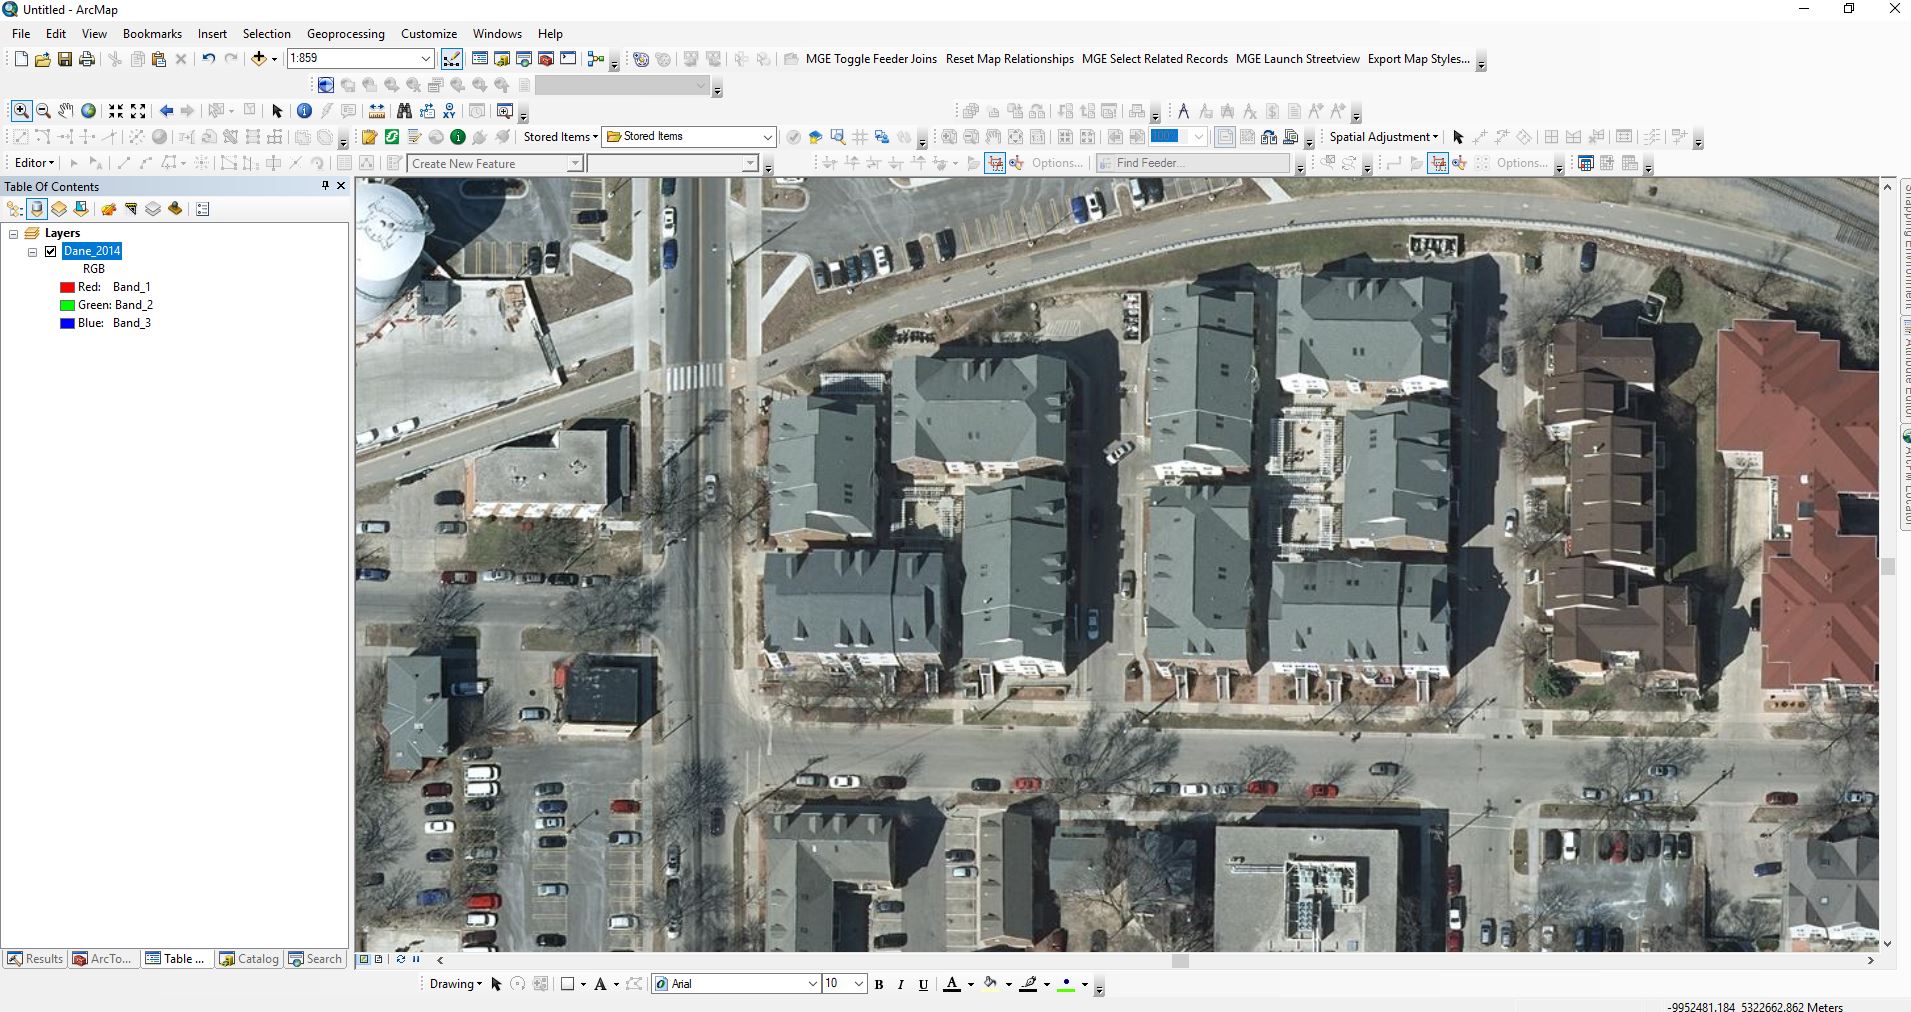 The image as it appears in Arcmap